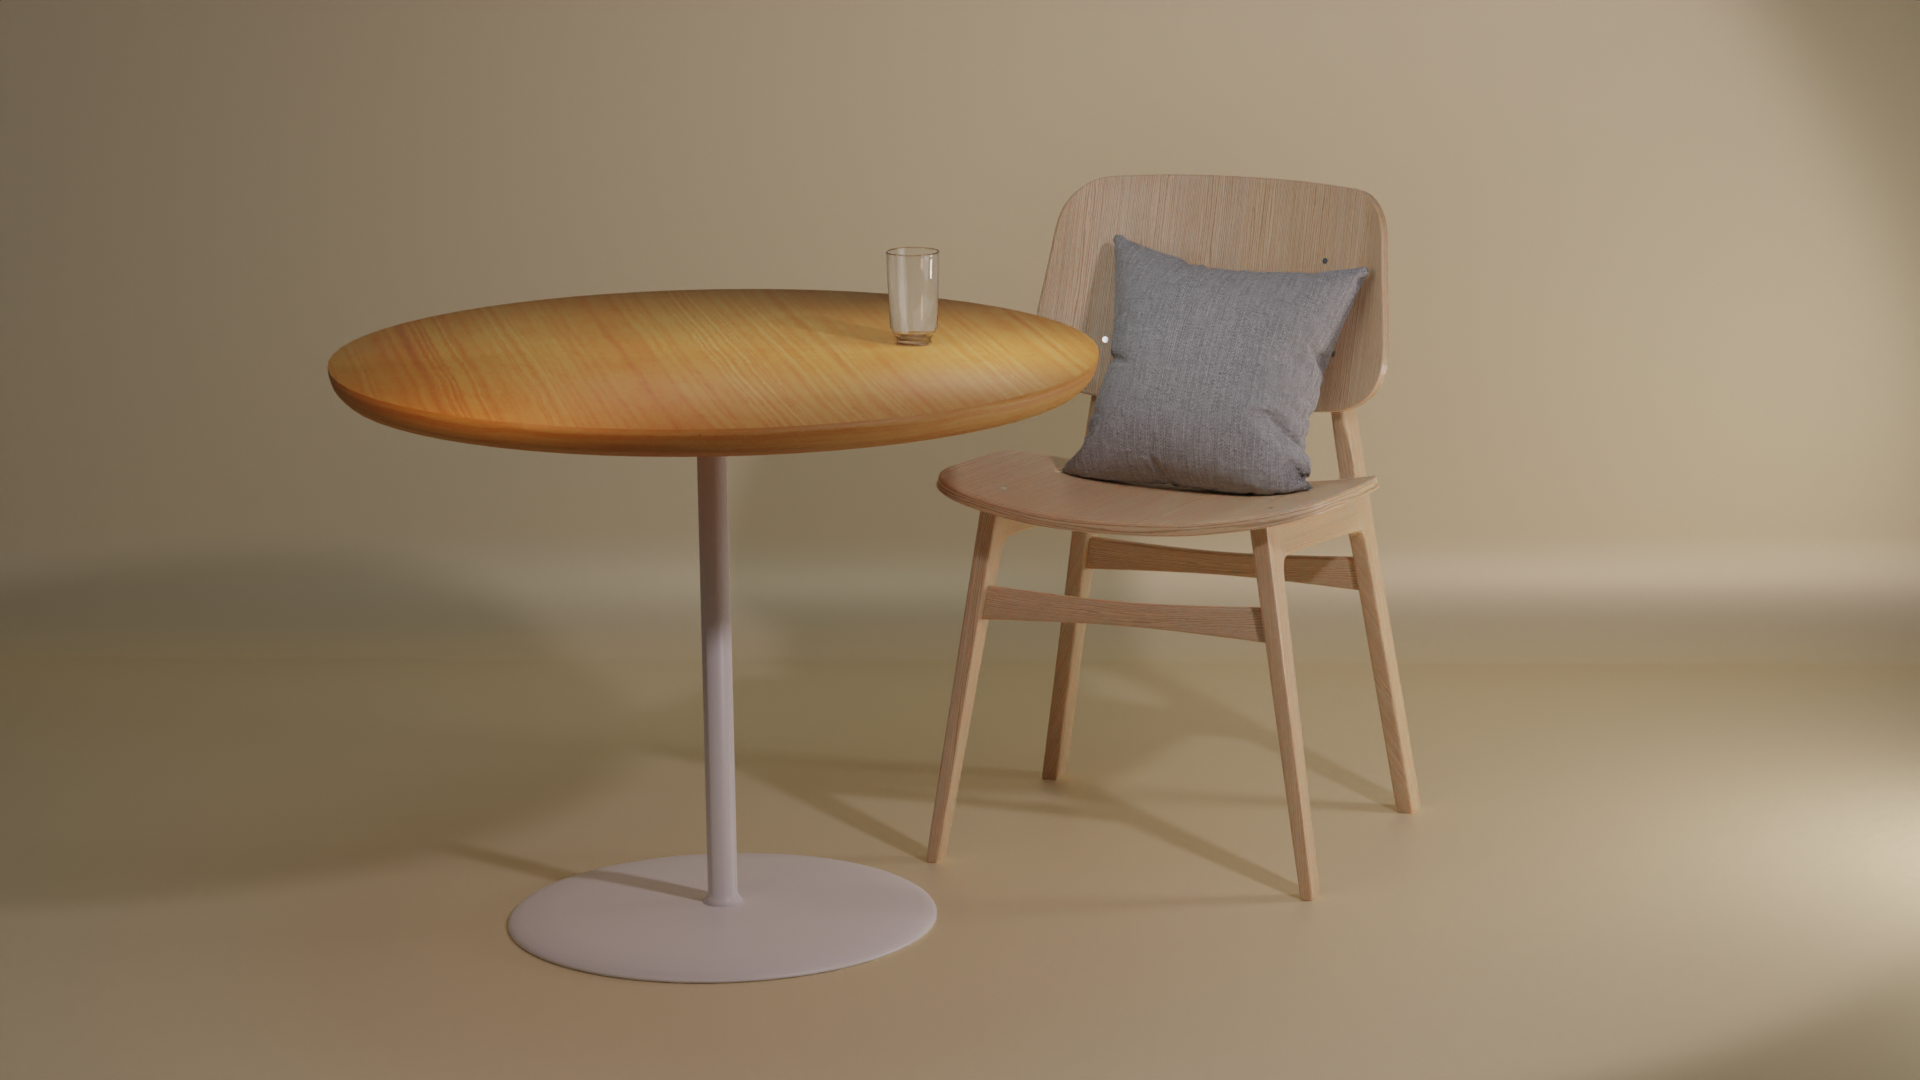 3D Rendered Chair, Glass, and Pillow